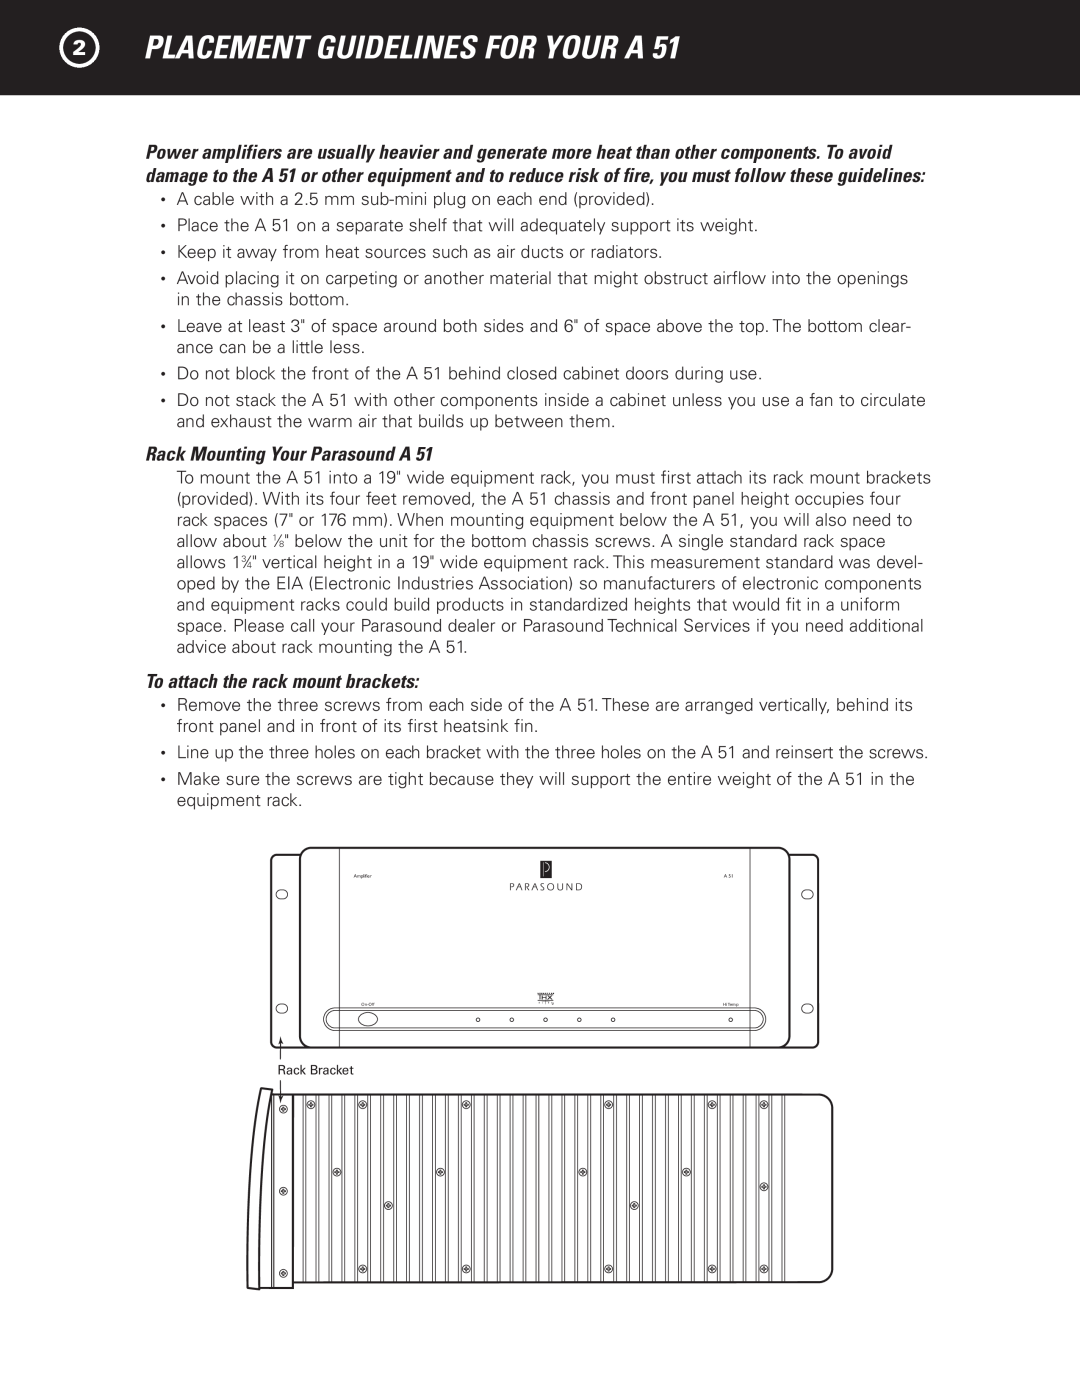 Parasound A 51 manual 2PLACEMENT GUIDELINES FOR YOUR A, Rack Mounting Your Parasound A, To attach the rack mount brackets 